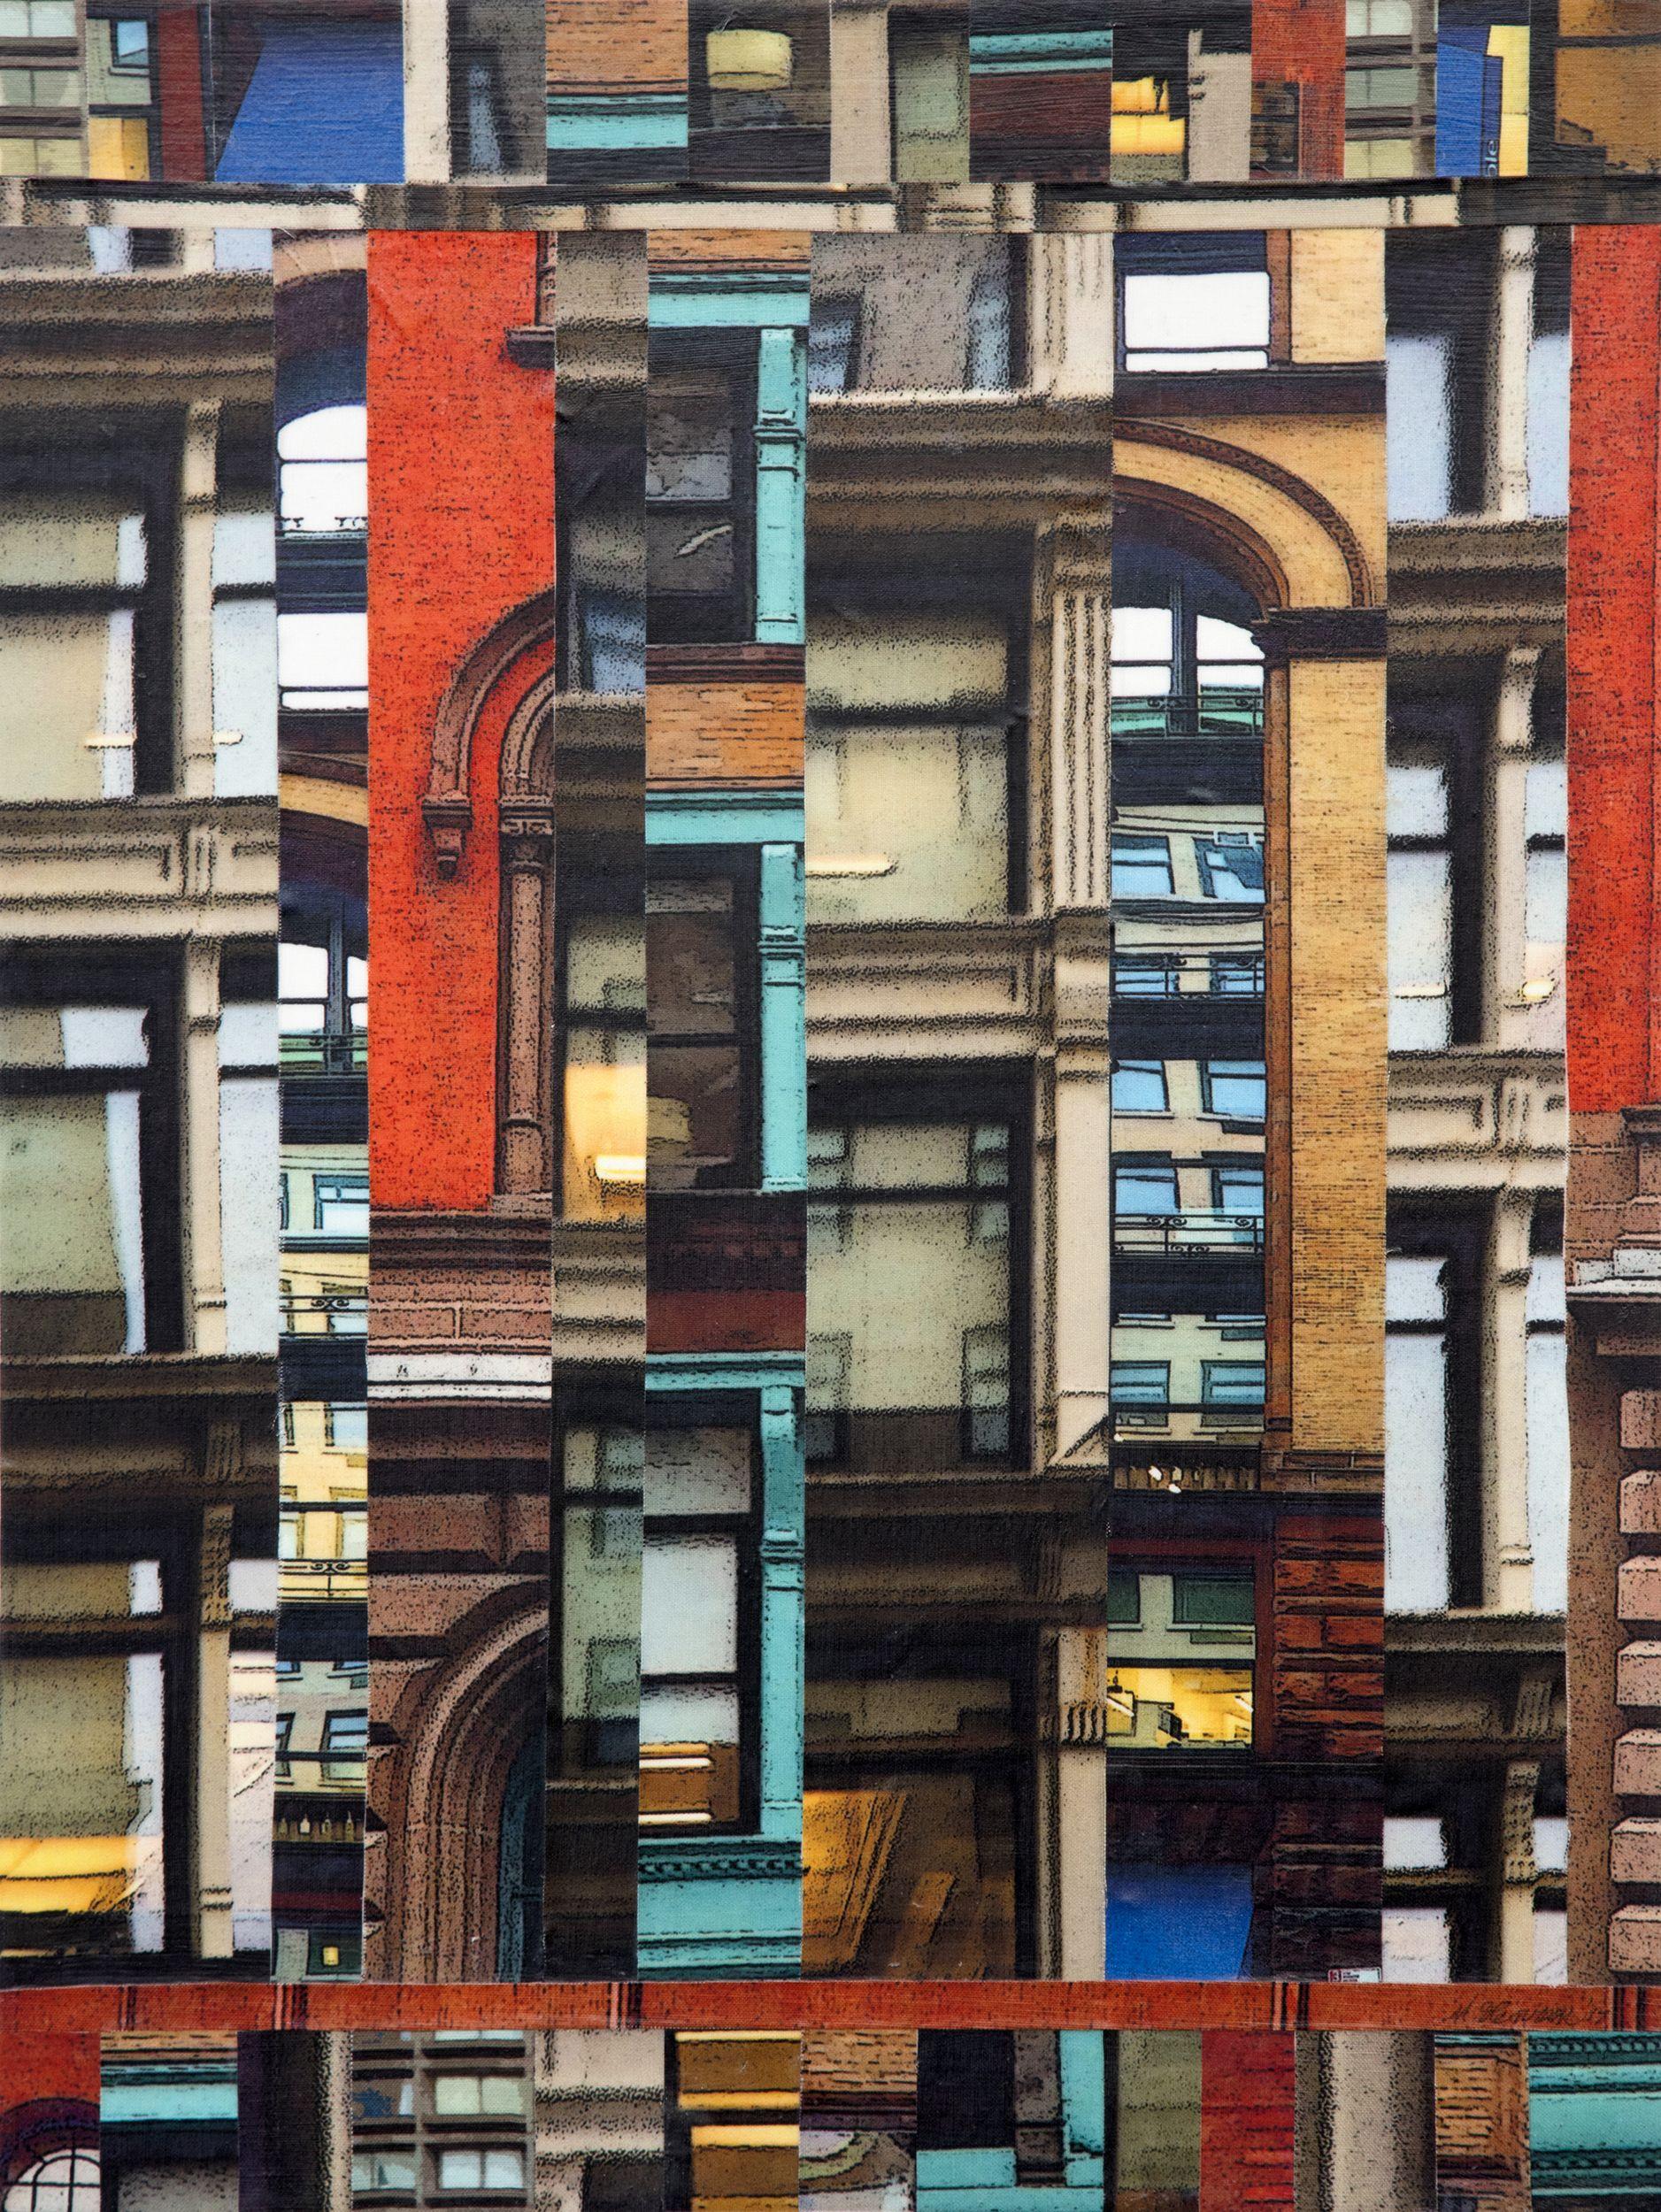 Patchwork City 71, Mixed Media on Canvas - Mixed Media Art by Marilyn Henrion